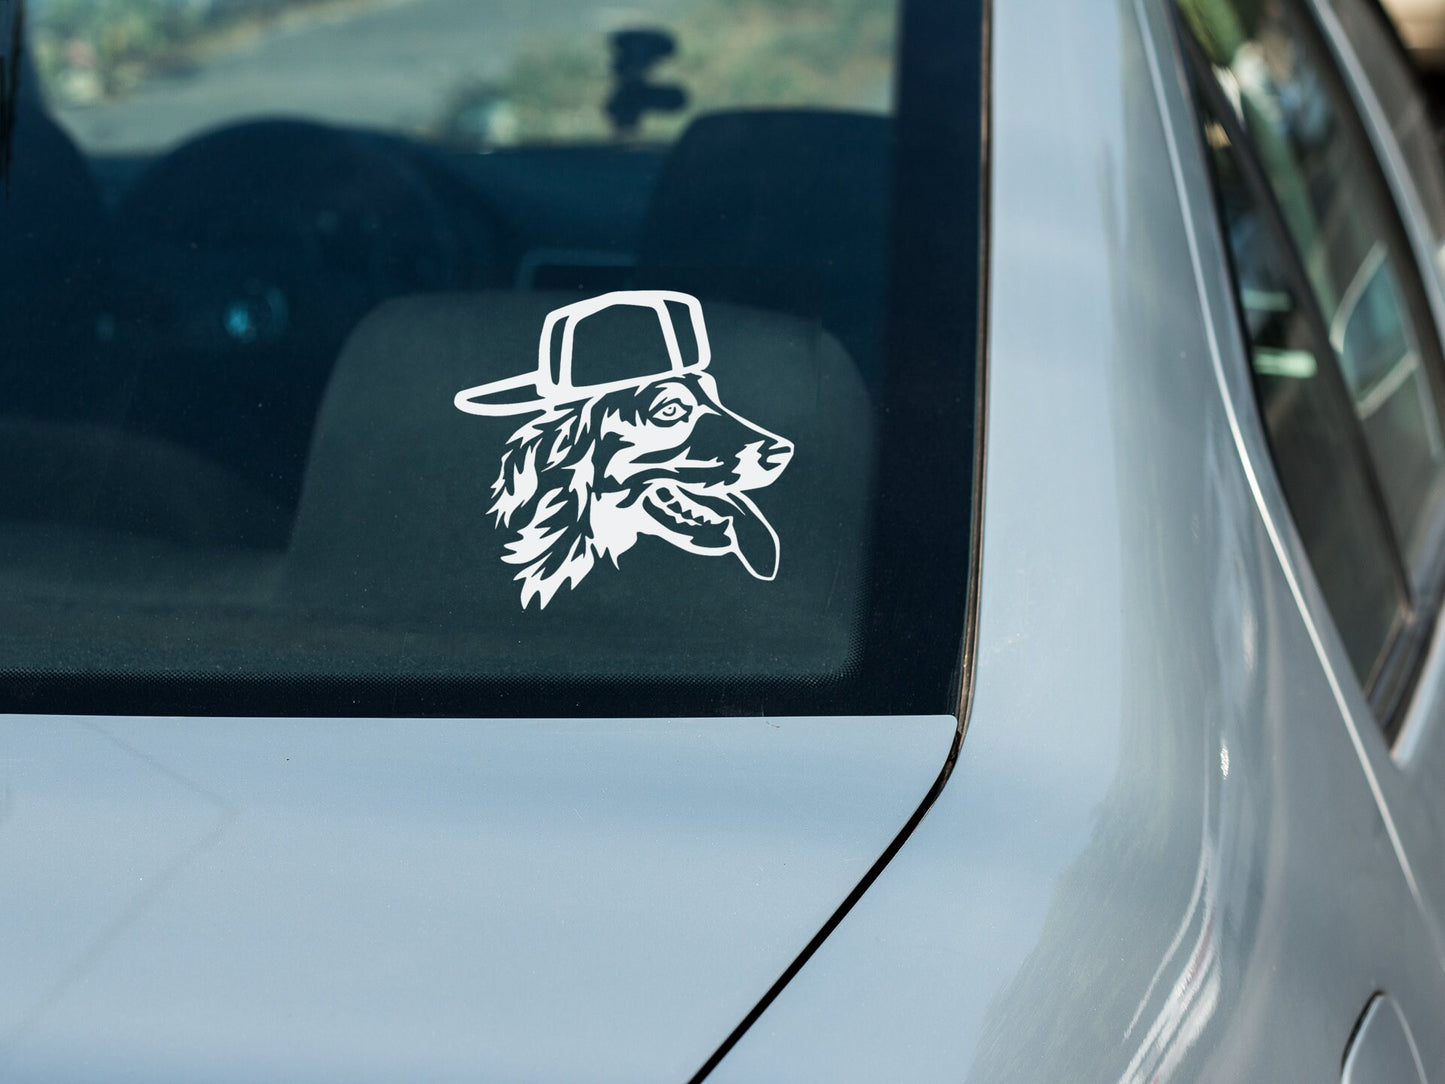 Boykin Hat Decal - Many Colors & Sizes